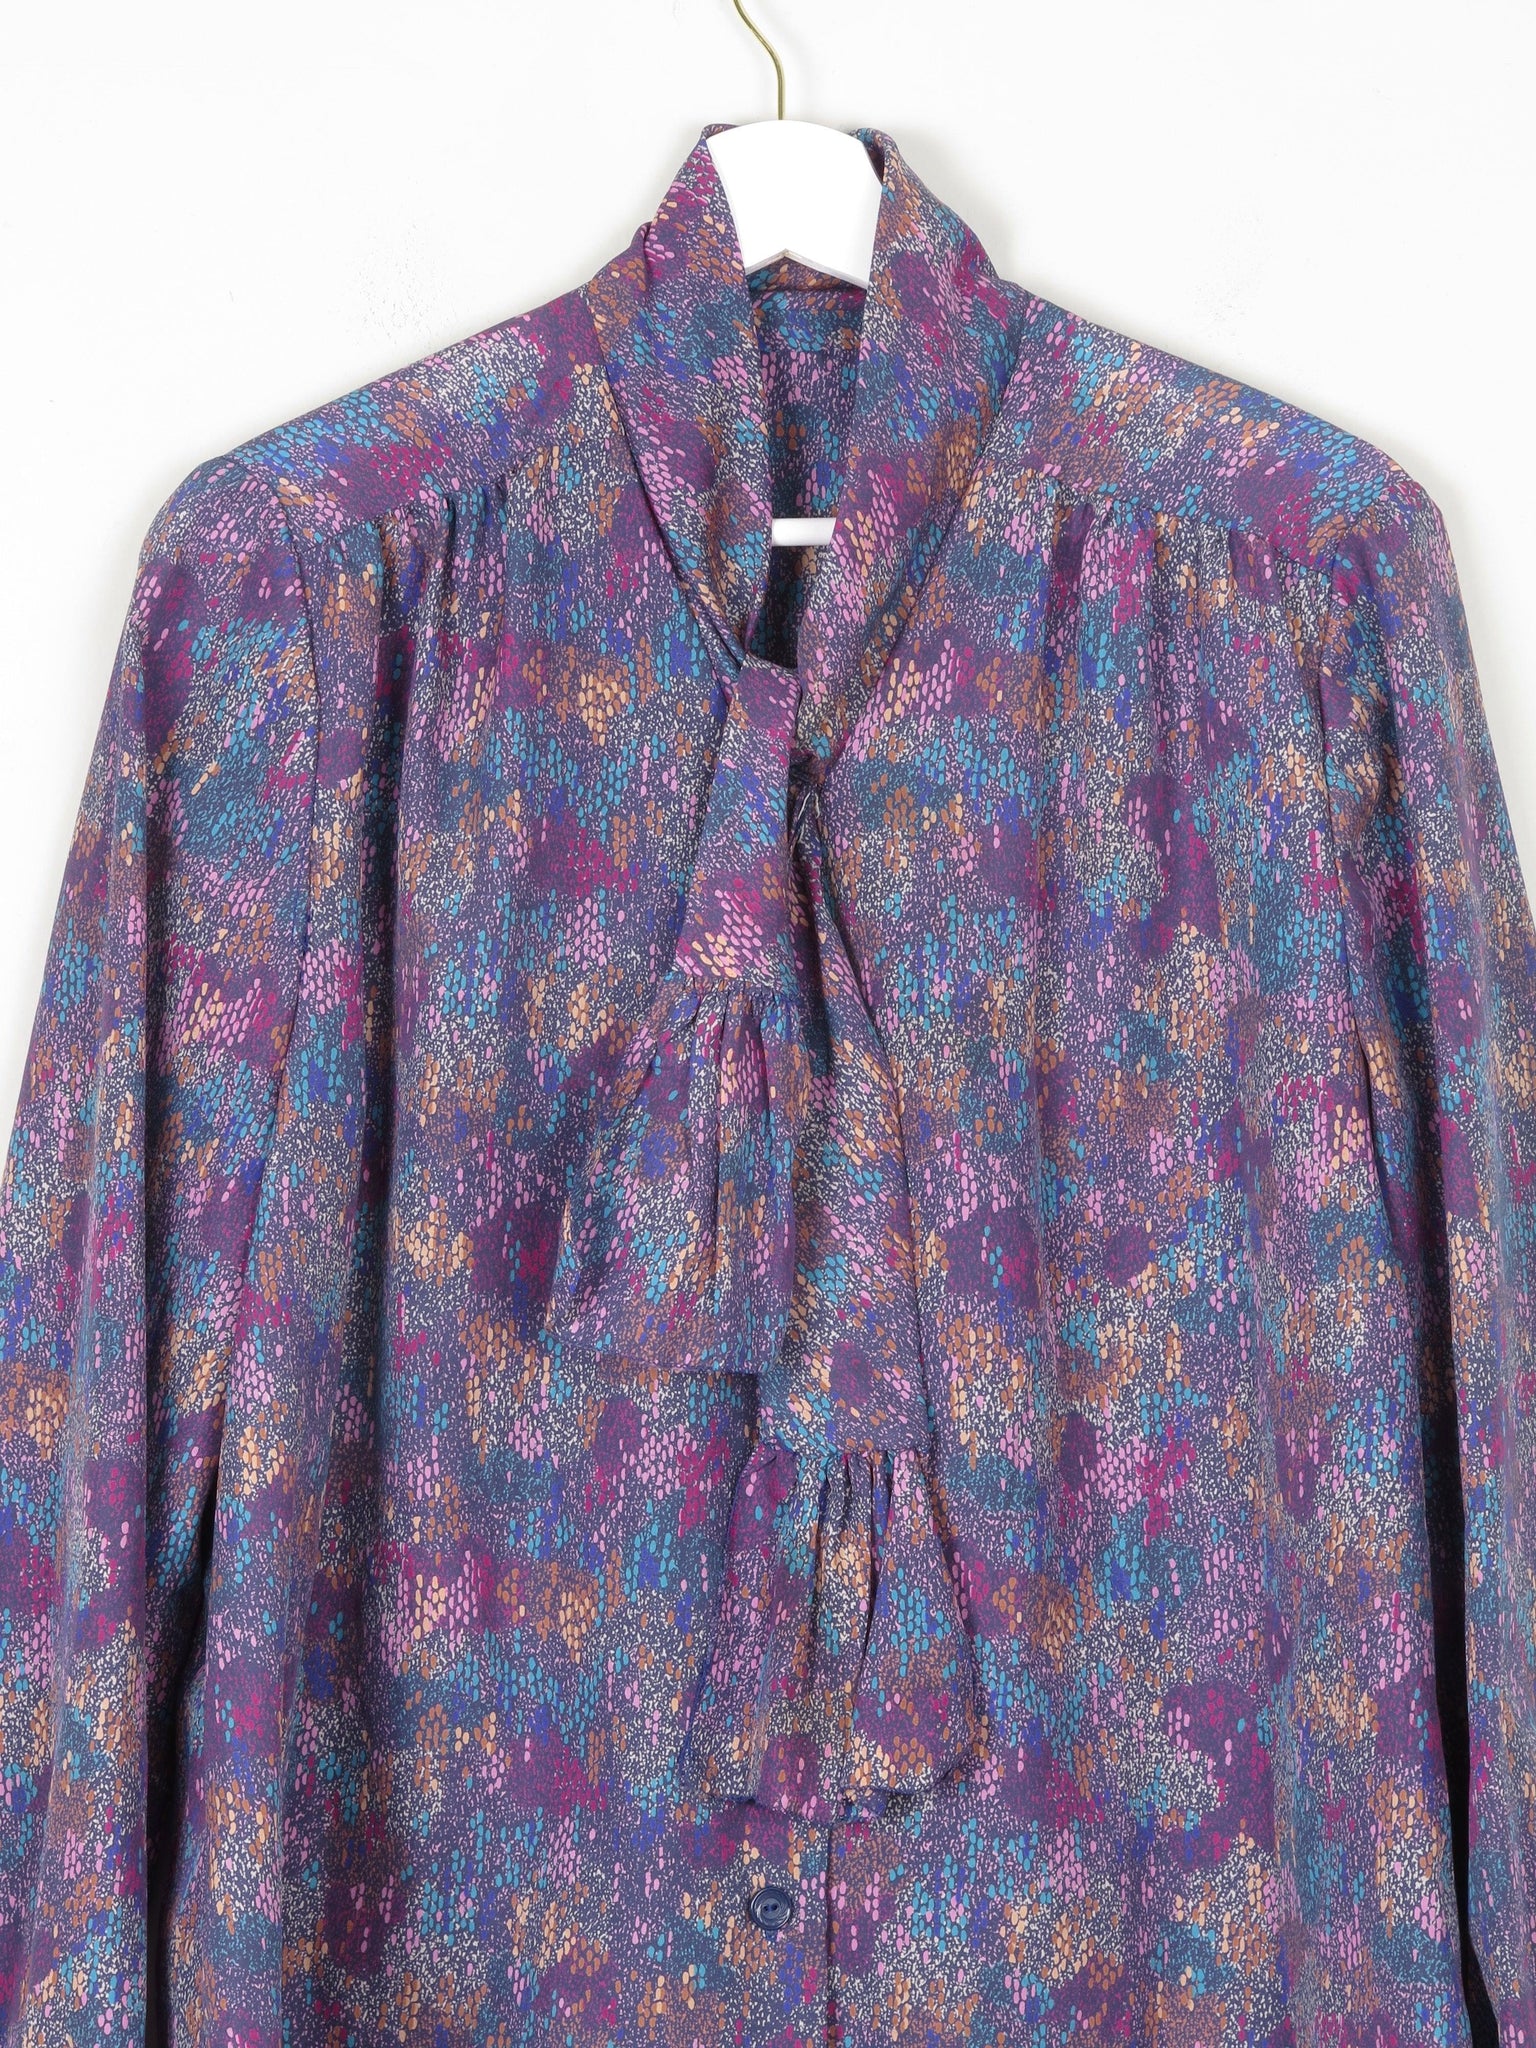 Women's Purple Printed Tie Neck blouse M/L 12/14 Approx - The Harlequin